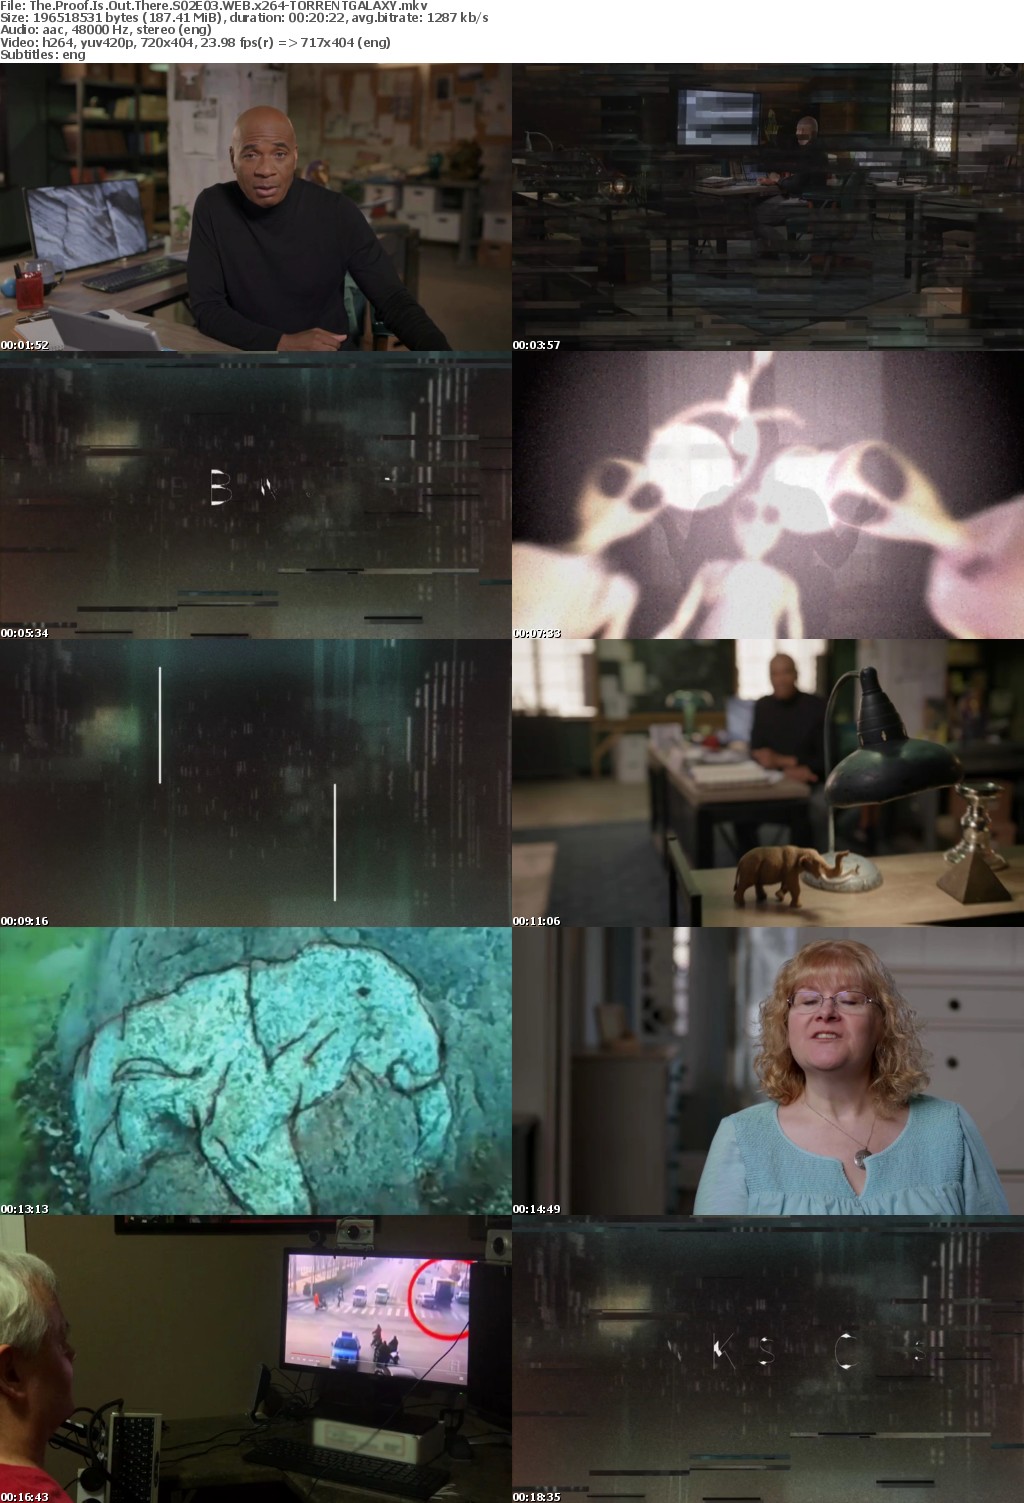 The Proof Is Out There S02E03 WEB x264-GALAXY